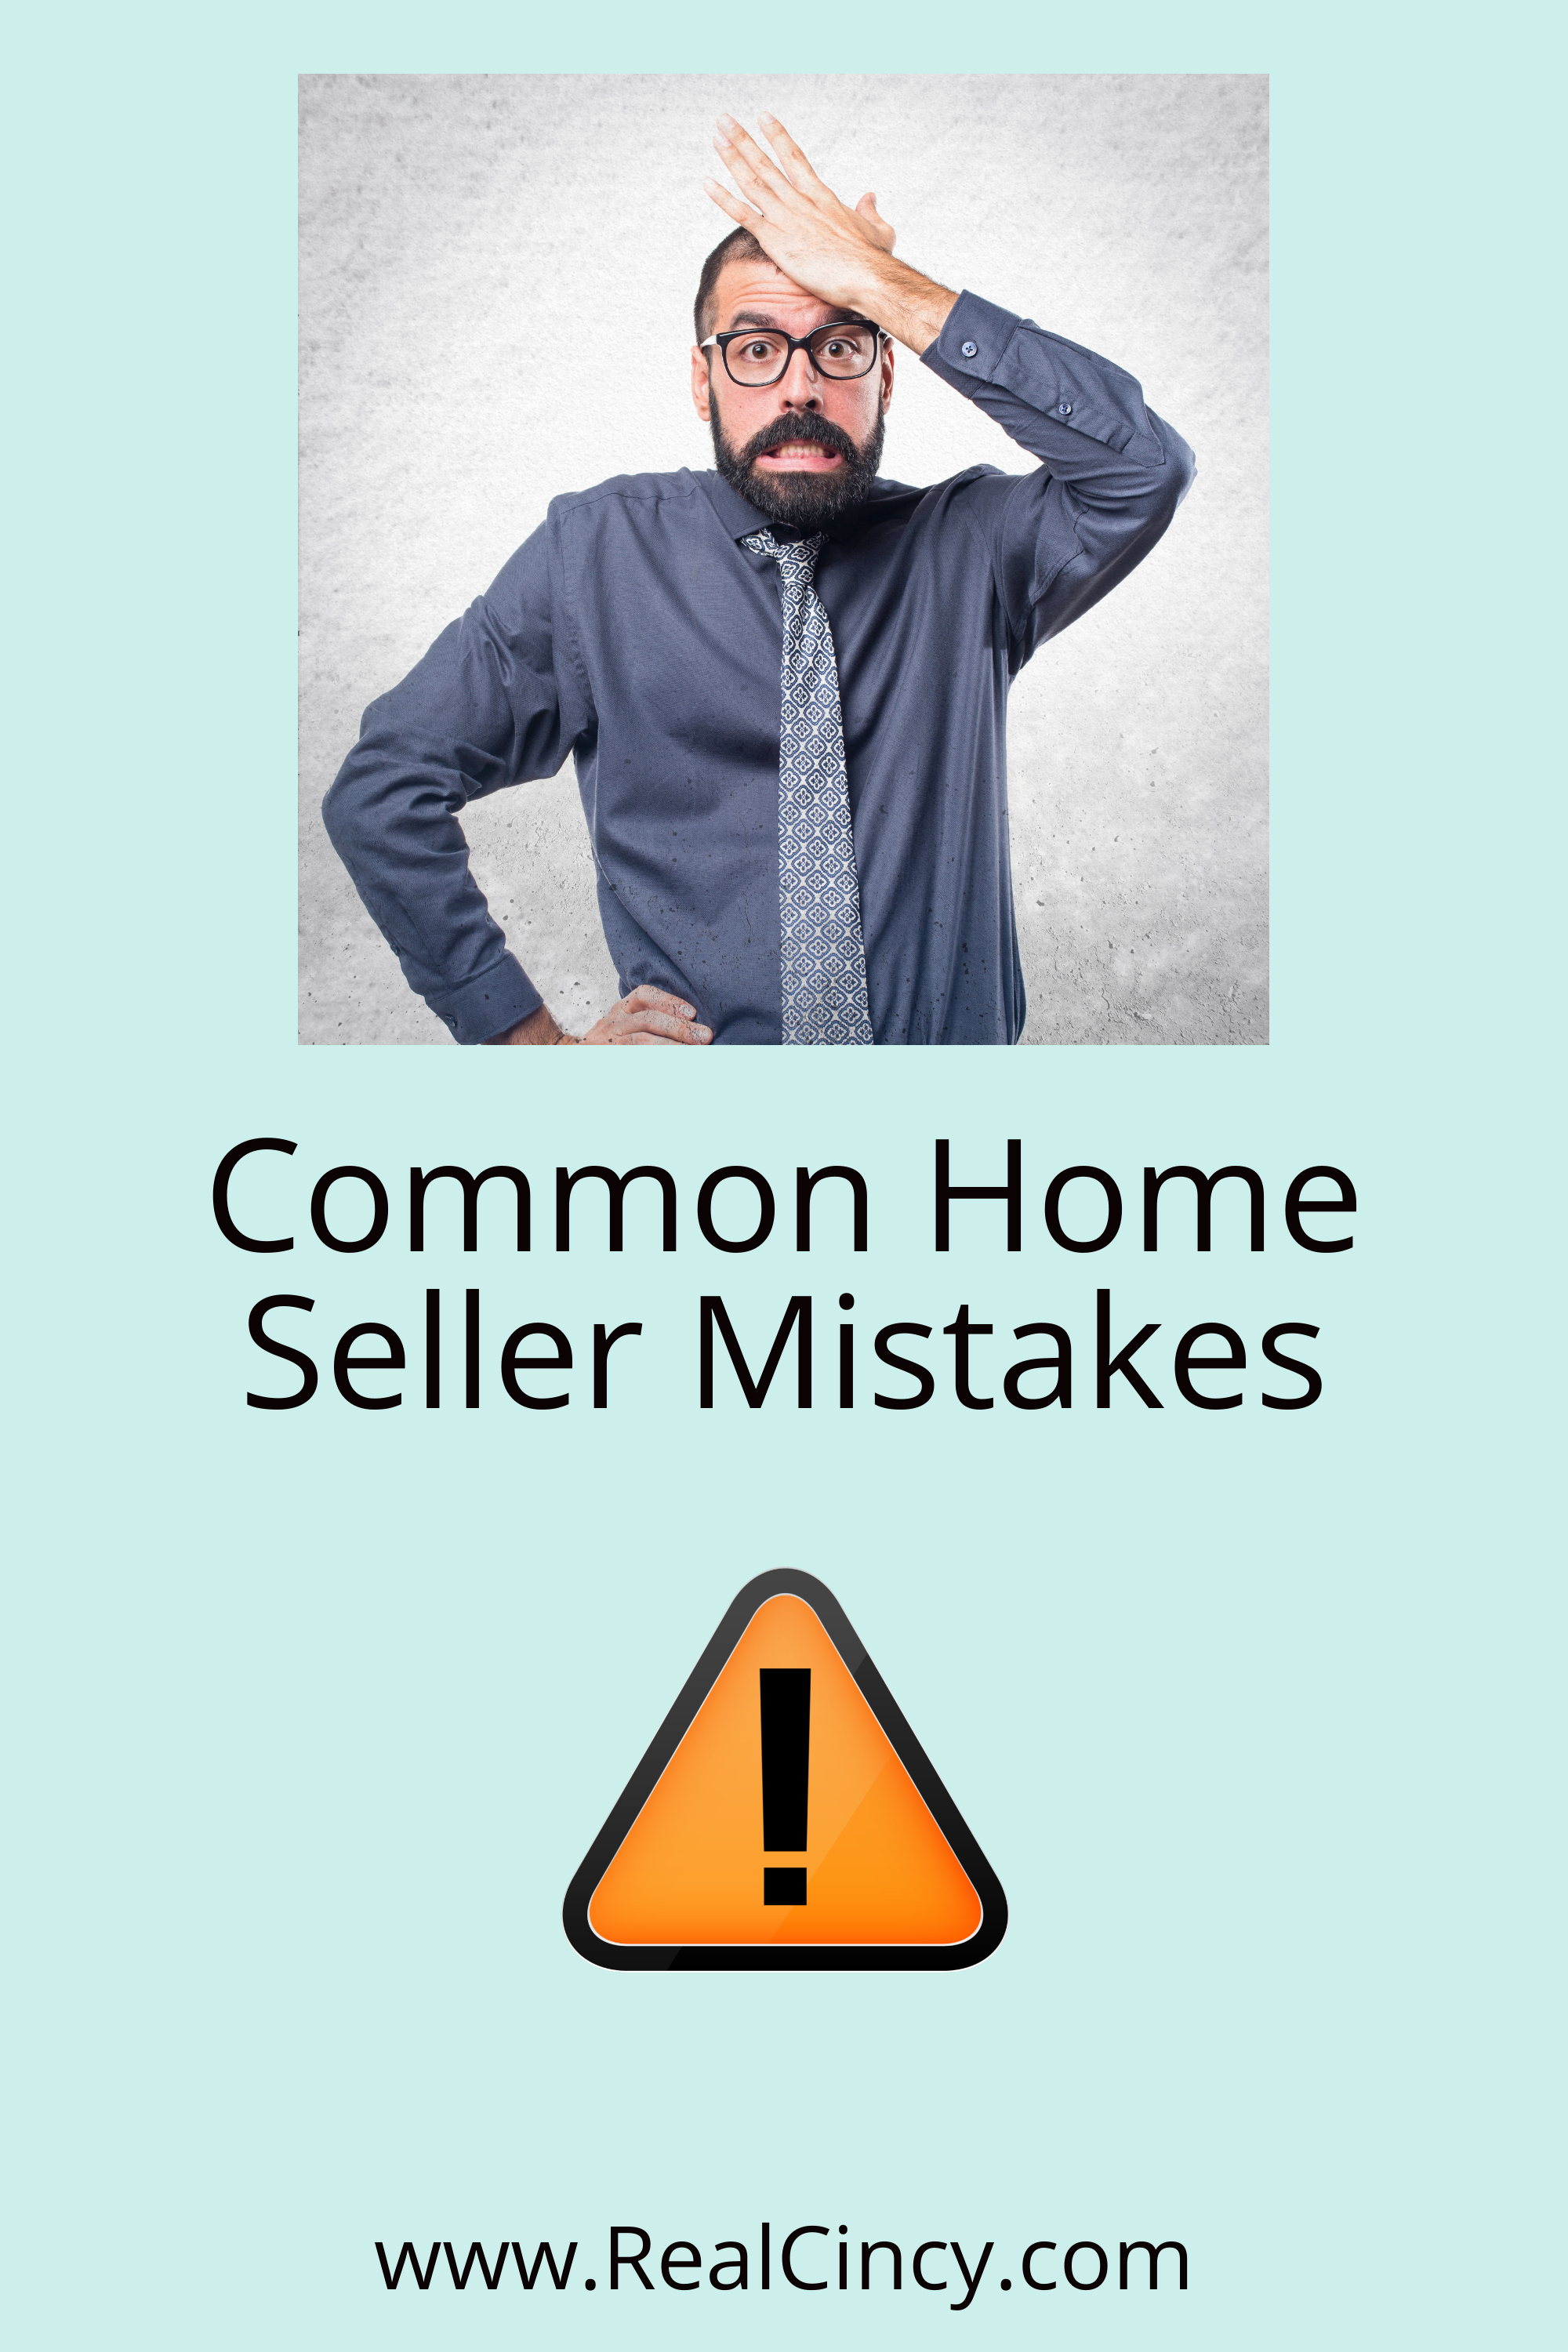 Common Seller Mistakes That Will Result In An Unsold Home